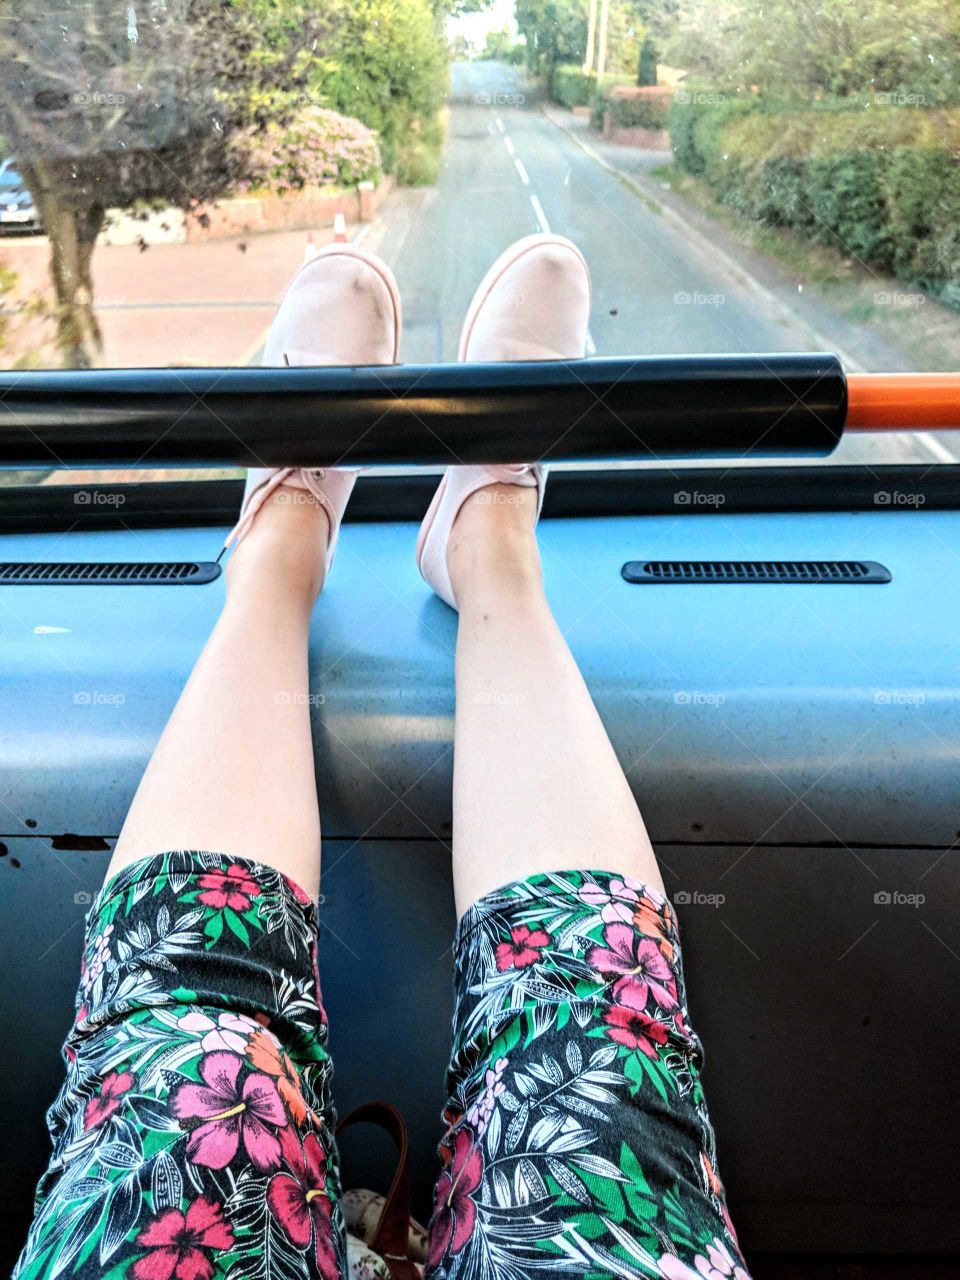 It's always more fun to sit at the top of the bus and absorb the beautiful summer scenery!